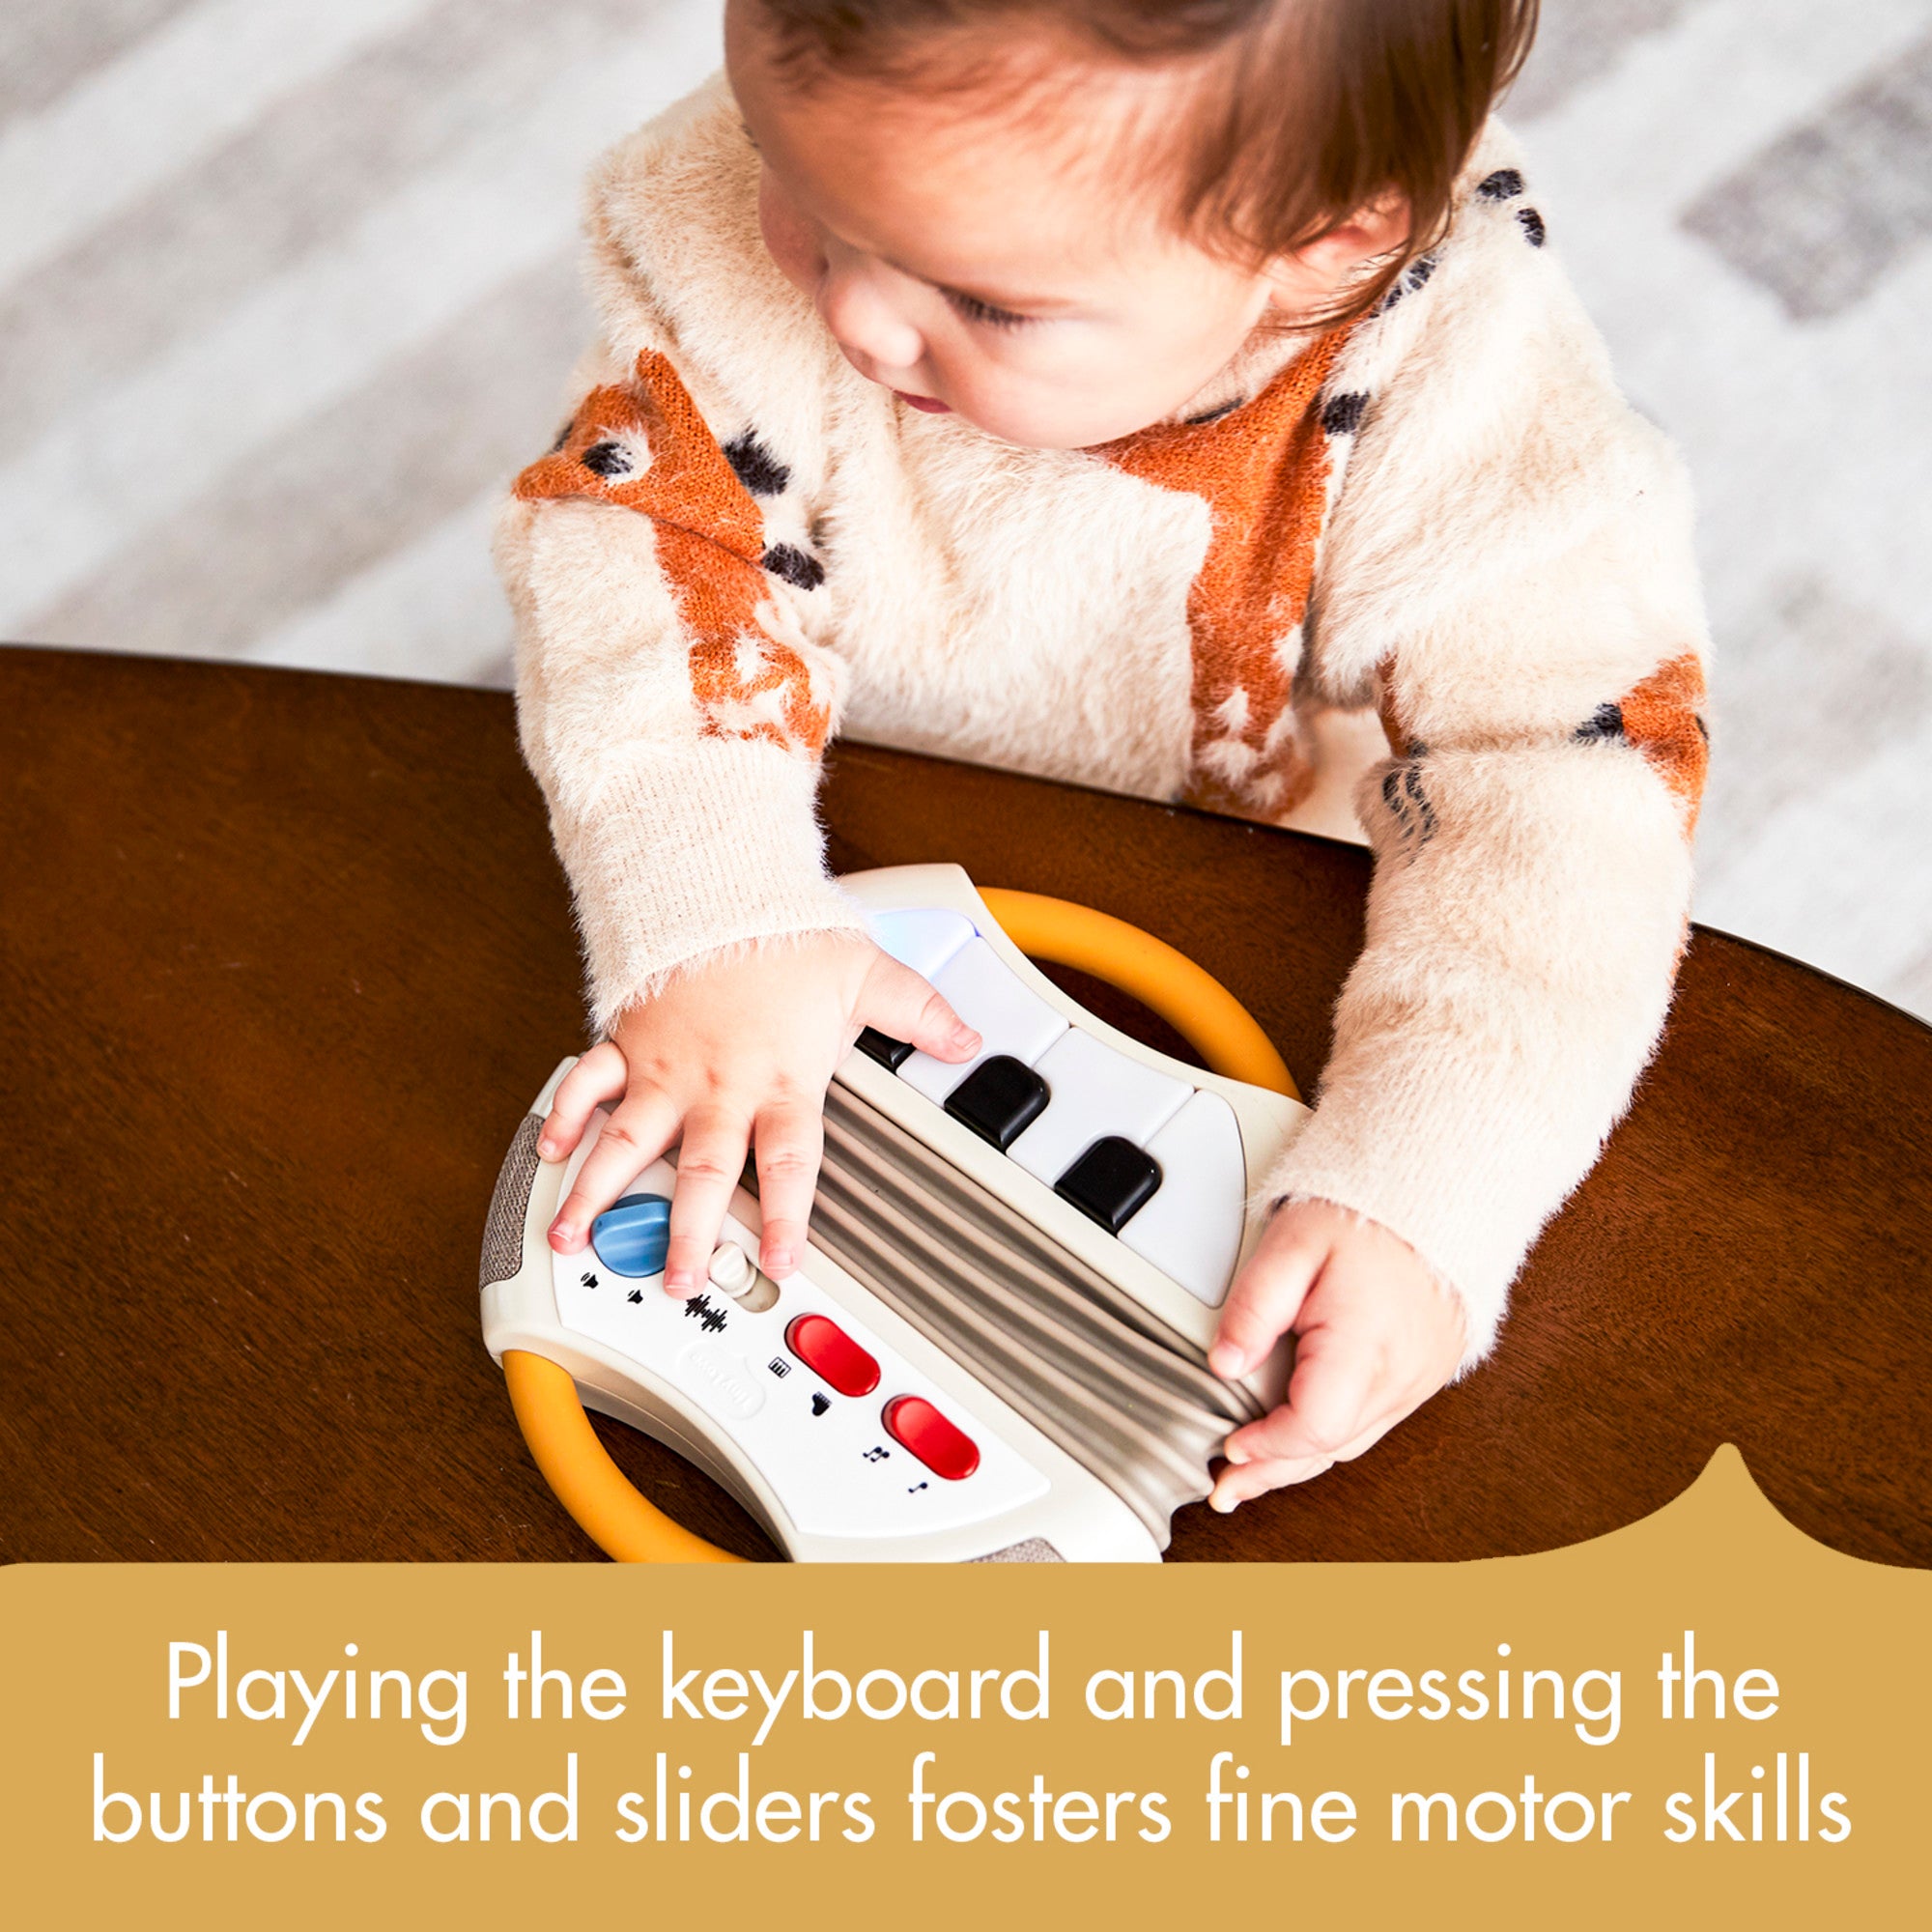 Tiny Rockers Accordion - Playing the keyboard and pressing the buttons and sliders fosters fine motor skills